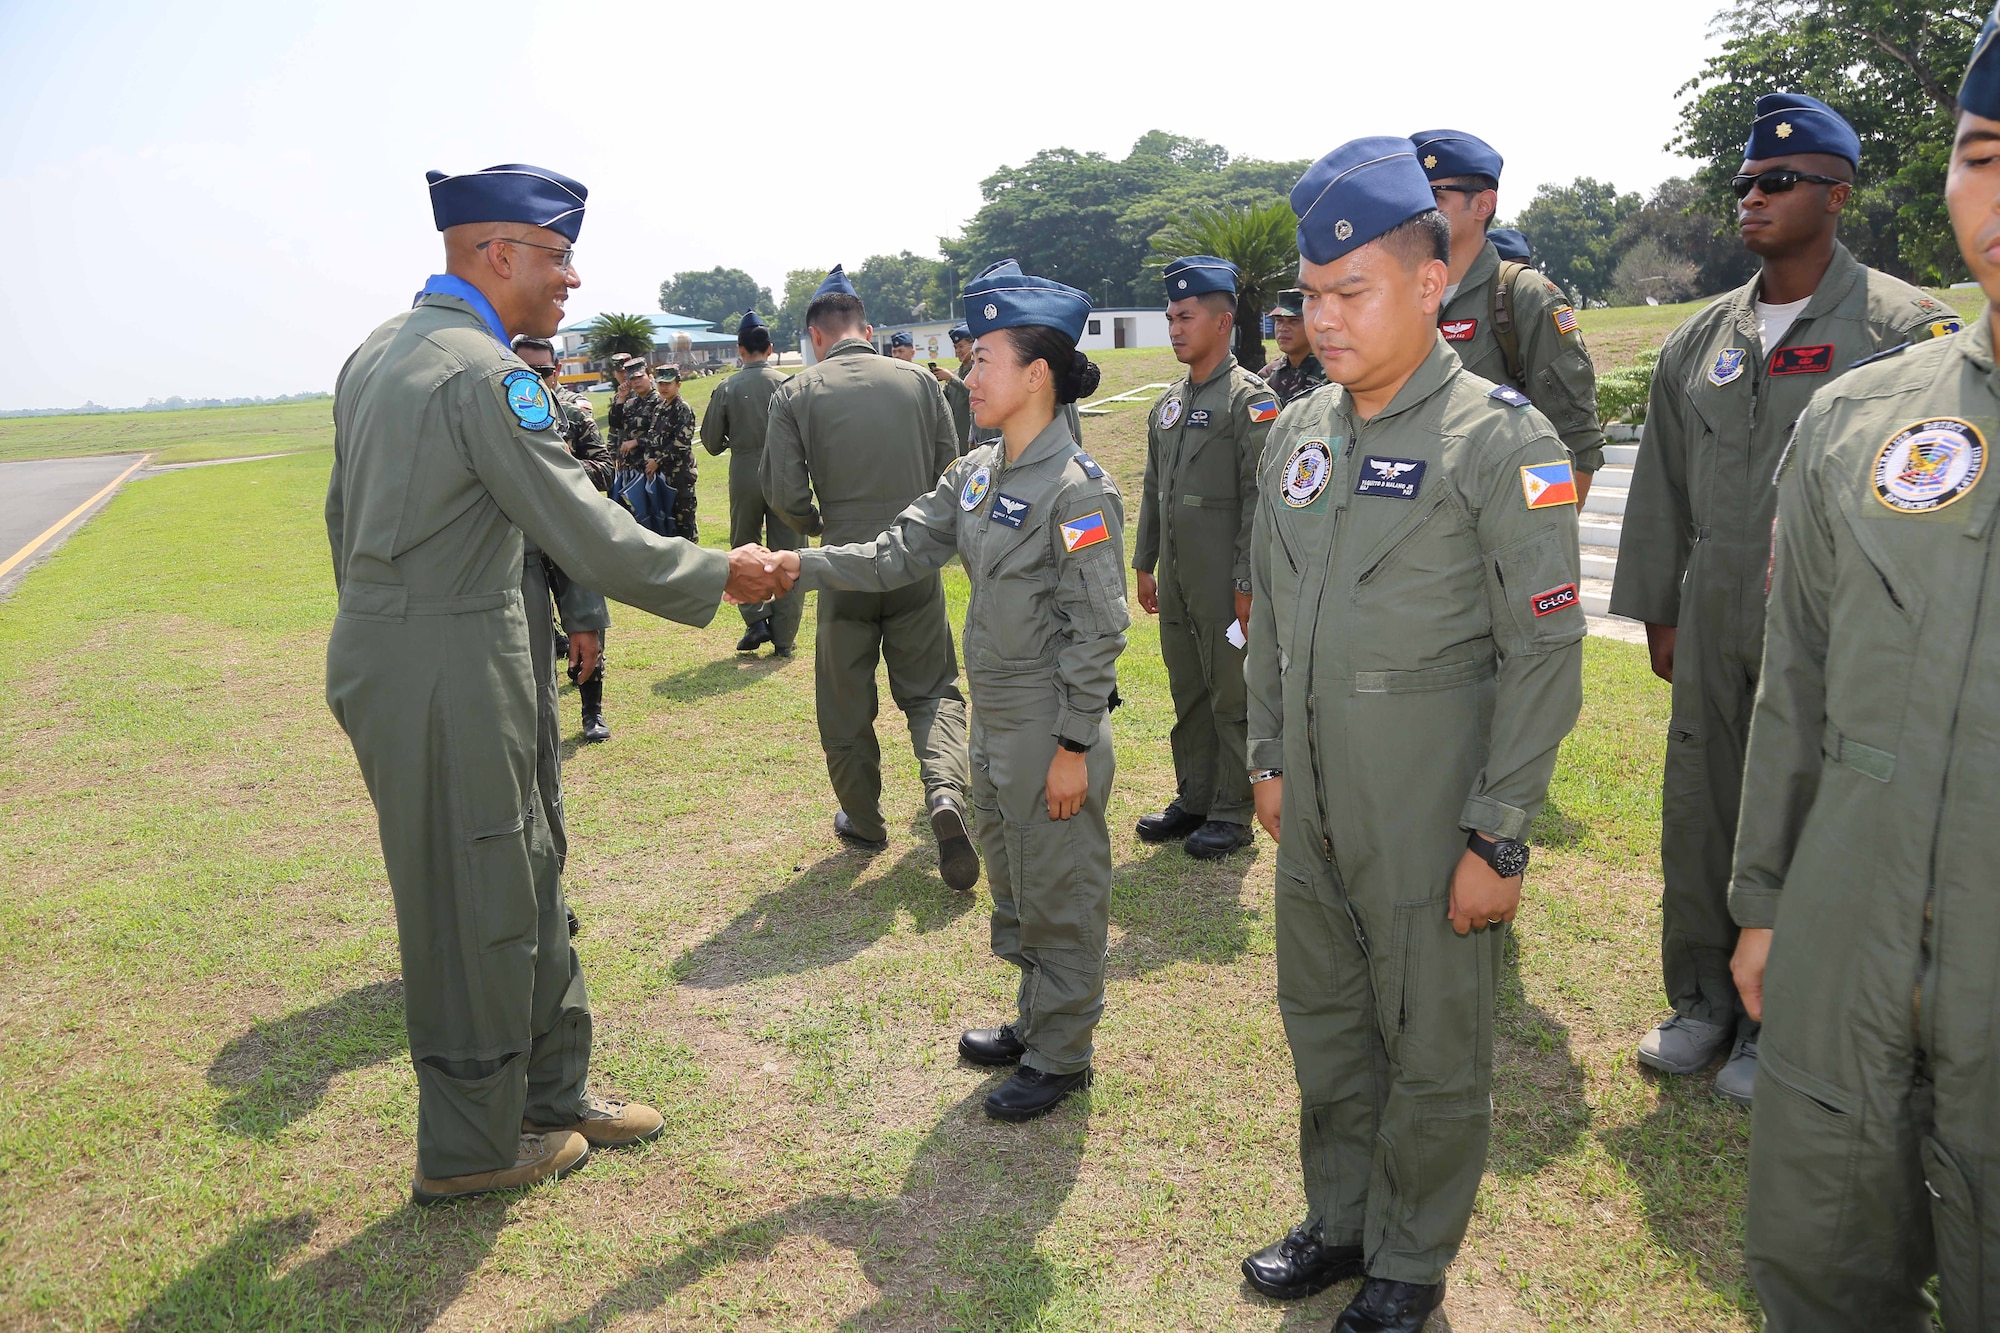 Gen. CQ Brown, Jr., Pacific Air Forces commander, greets Philippines Air Force airmen at Basa Air Base May 17 as part of a three-day visit to the Philippines. Brown, along with Chief Master Sgt. Anthony Johnson, PACAF command chief, visited the country to demonstrate the United States’ shared commitment to peace and security in the region, as well as seek opportunities to enhance interoperability and capability with the PAF.